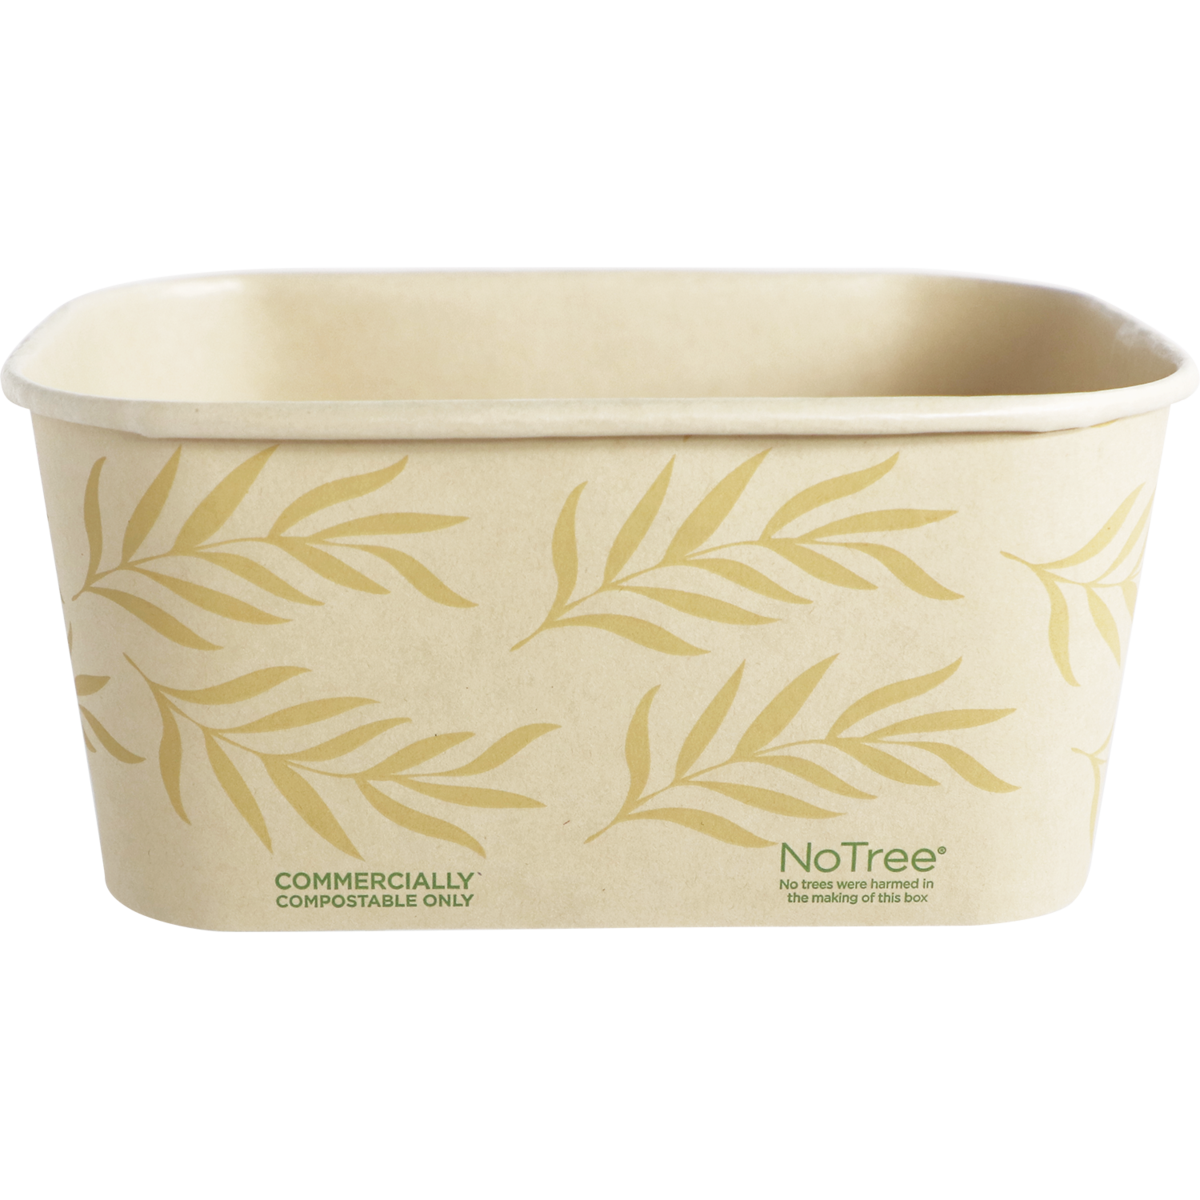 World Centric CT-NT-32 - 32oz NoTree Rectangular Container - Case of 300